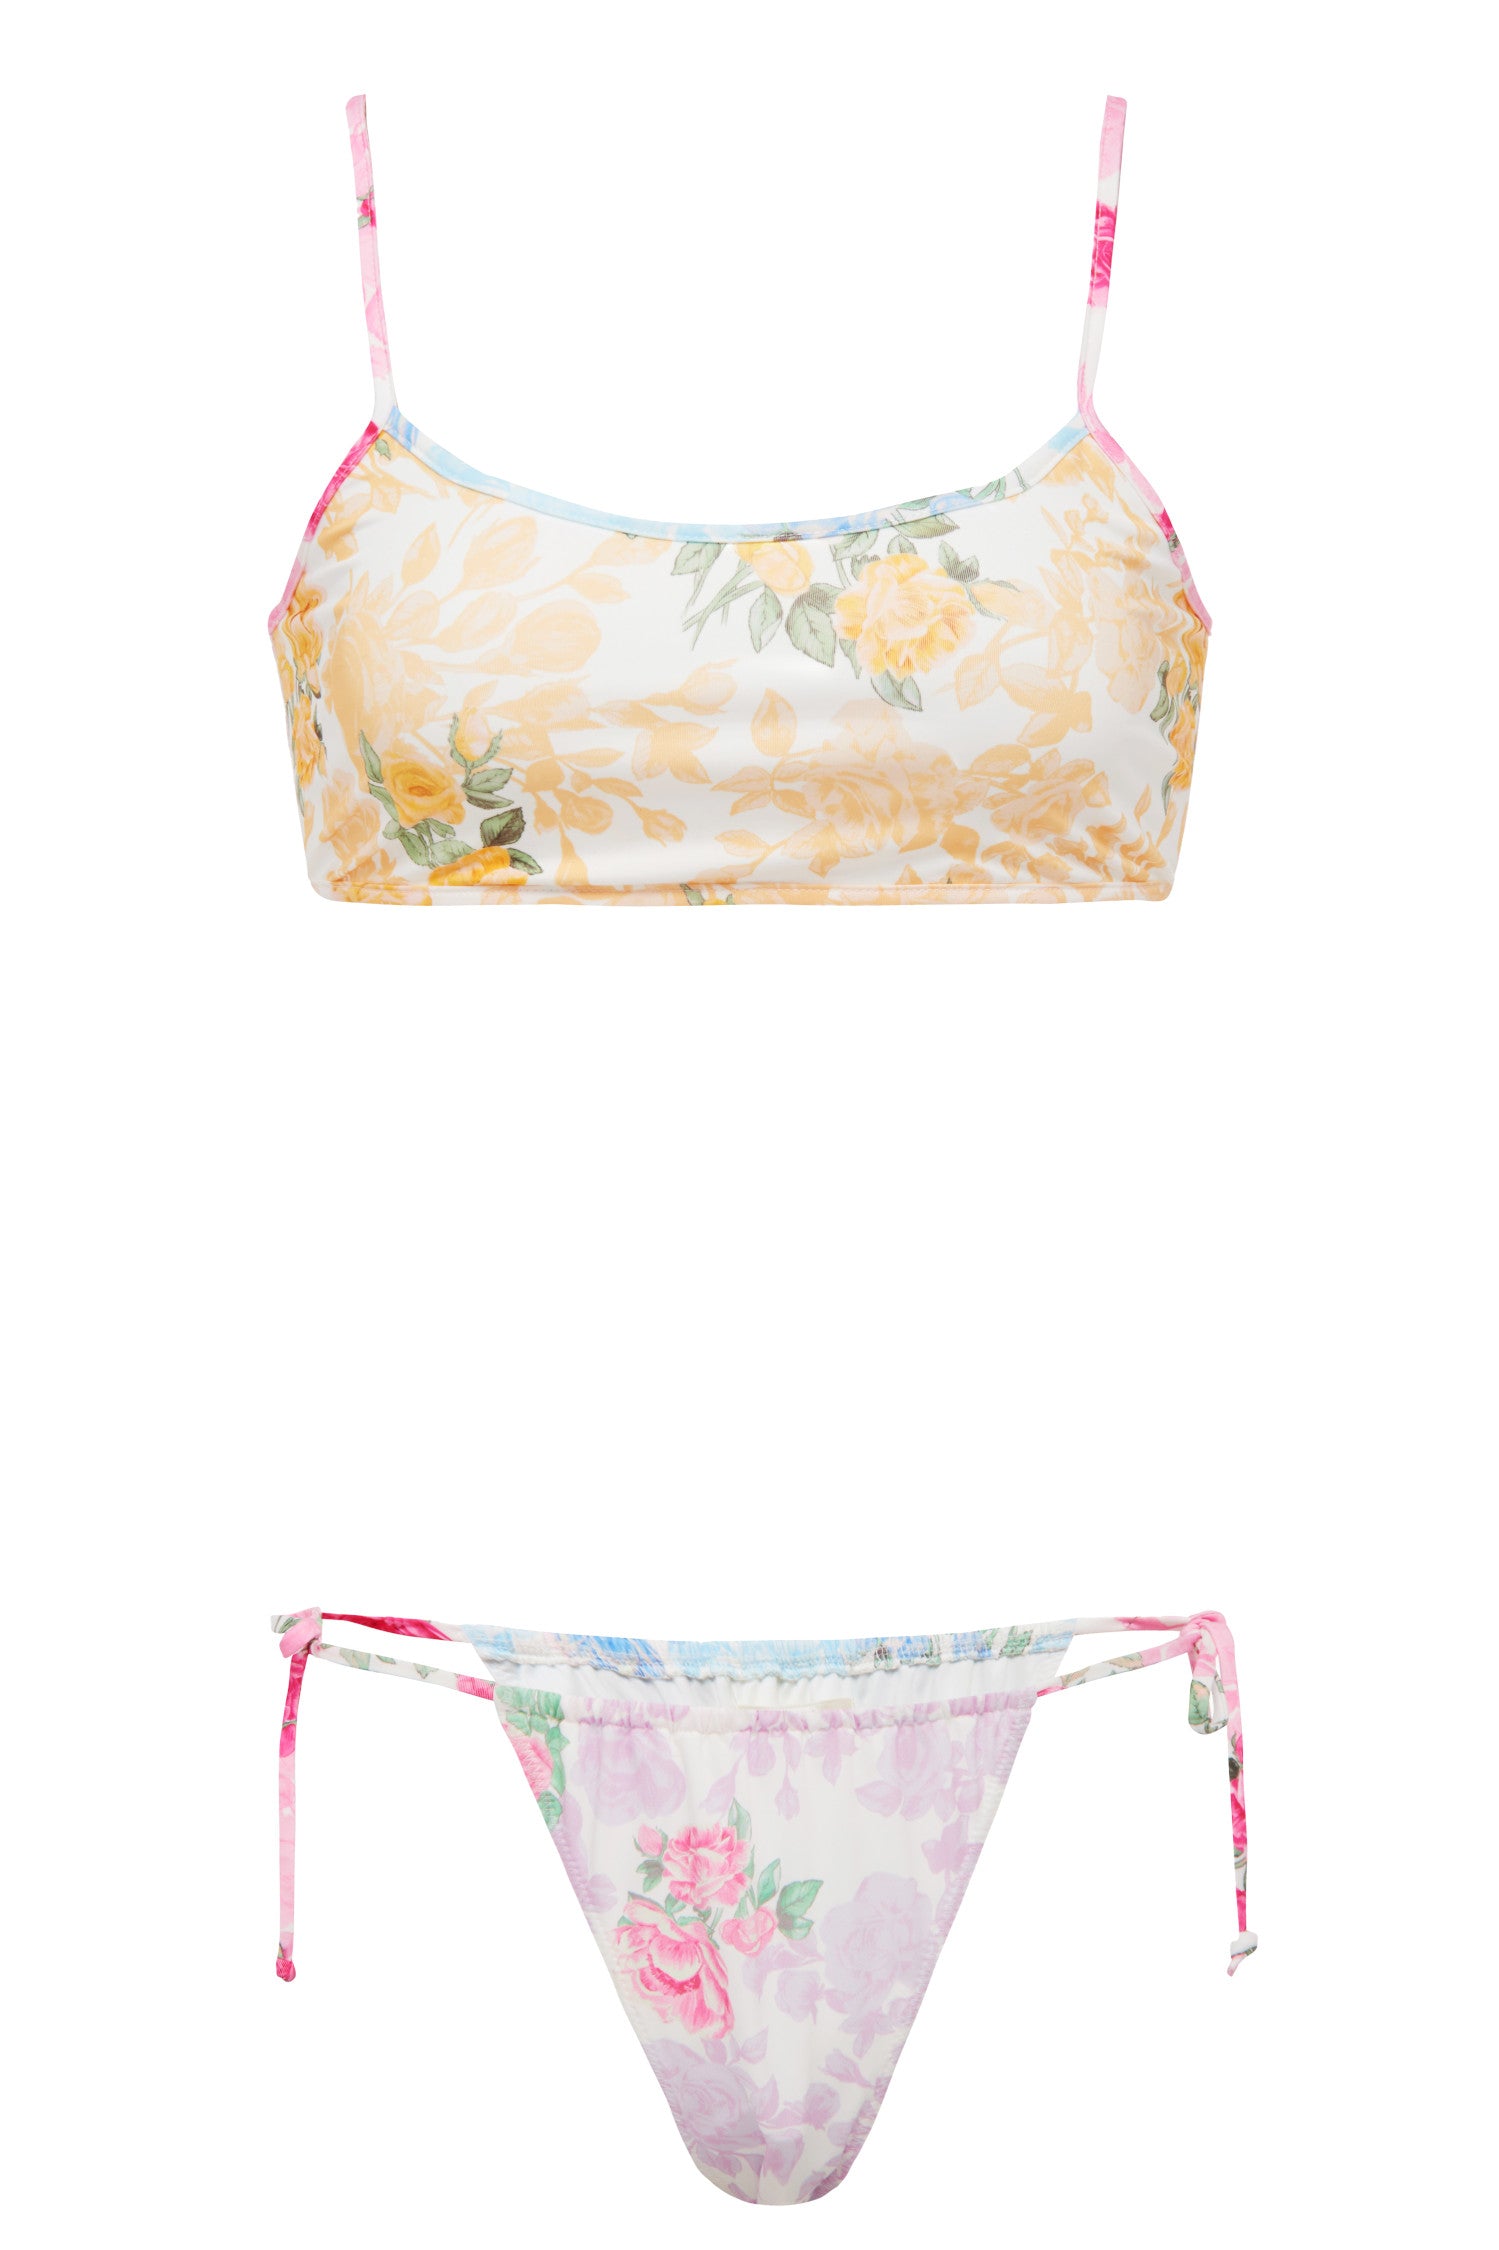 Floral scoop neck top and cheeky side tie bottoms.